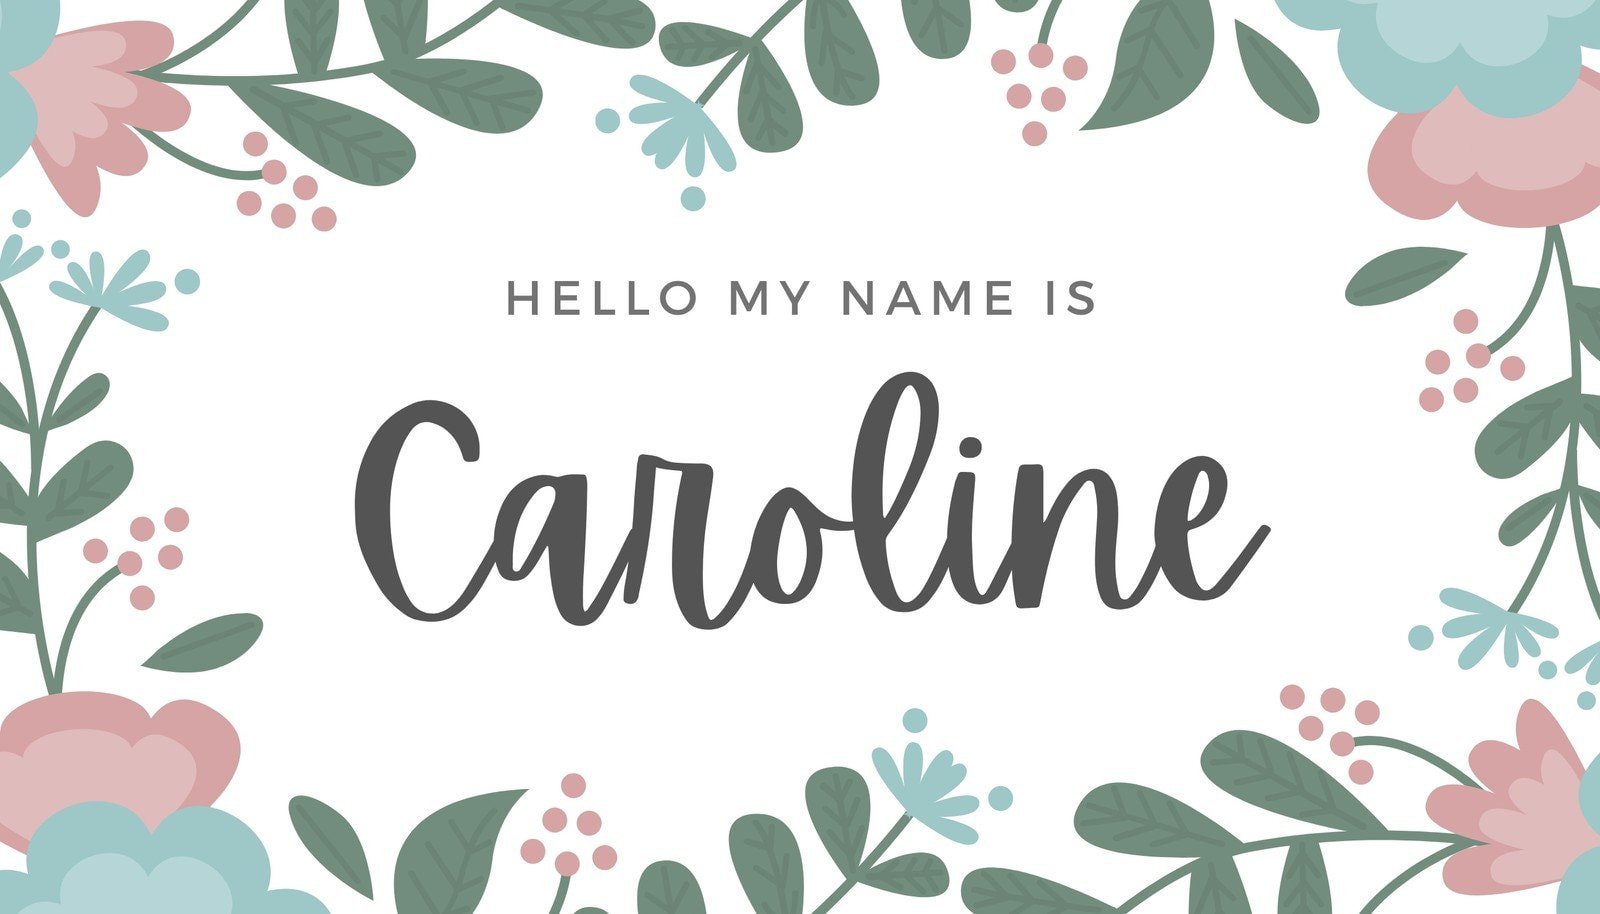 Free Online Name Tags Maker: Design a Custom Name Tag